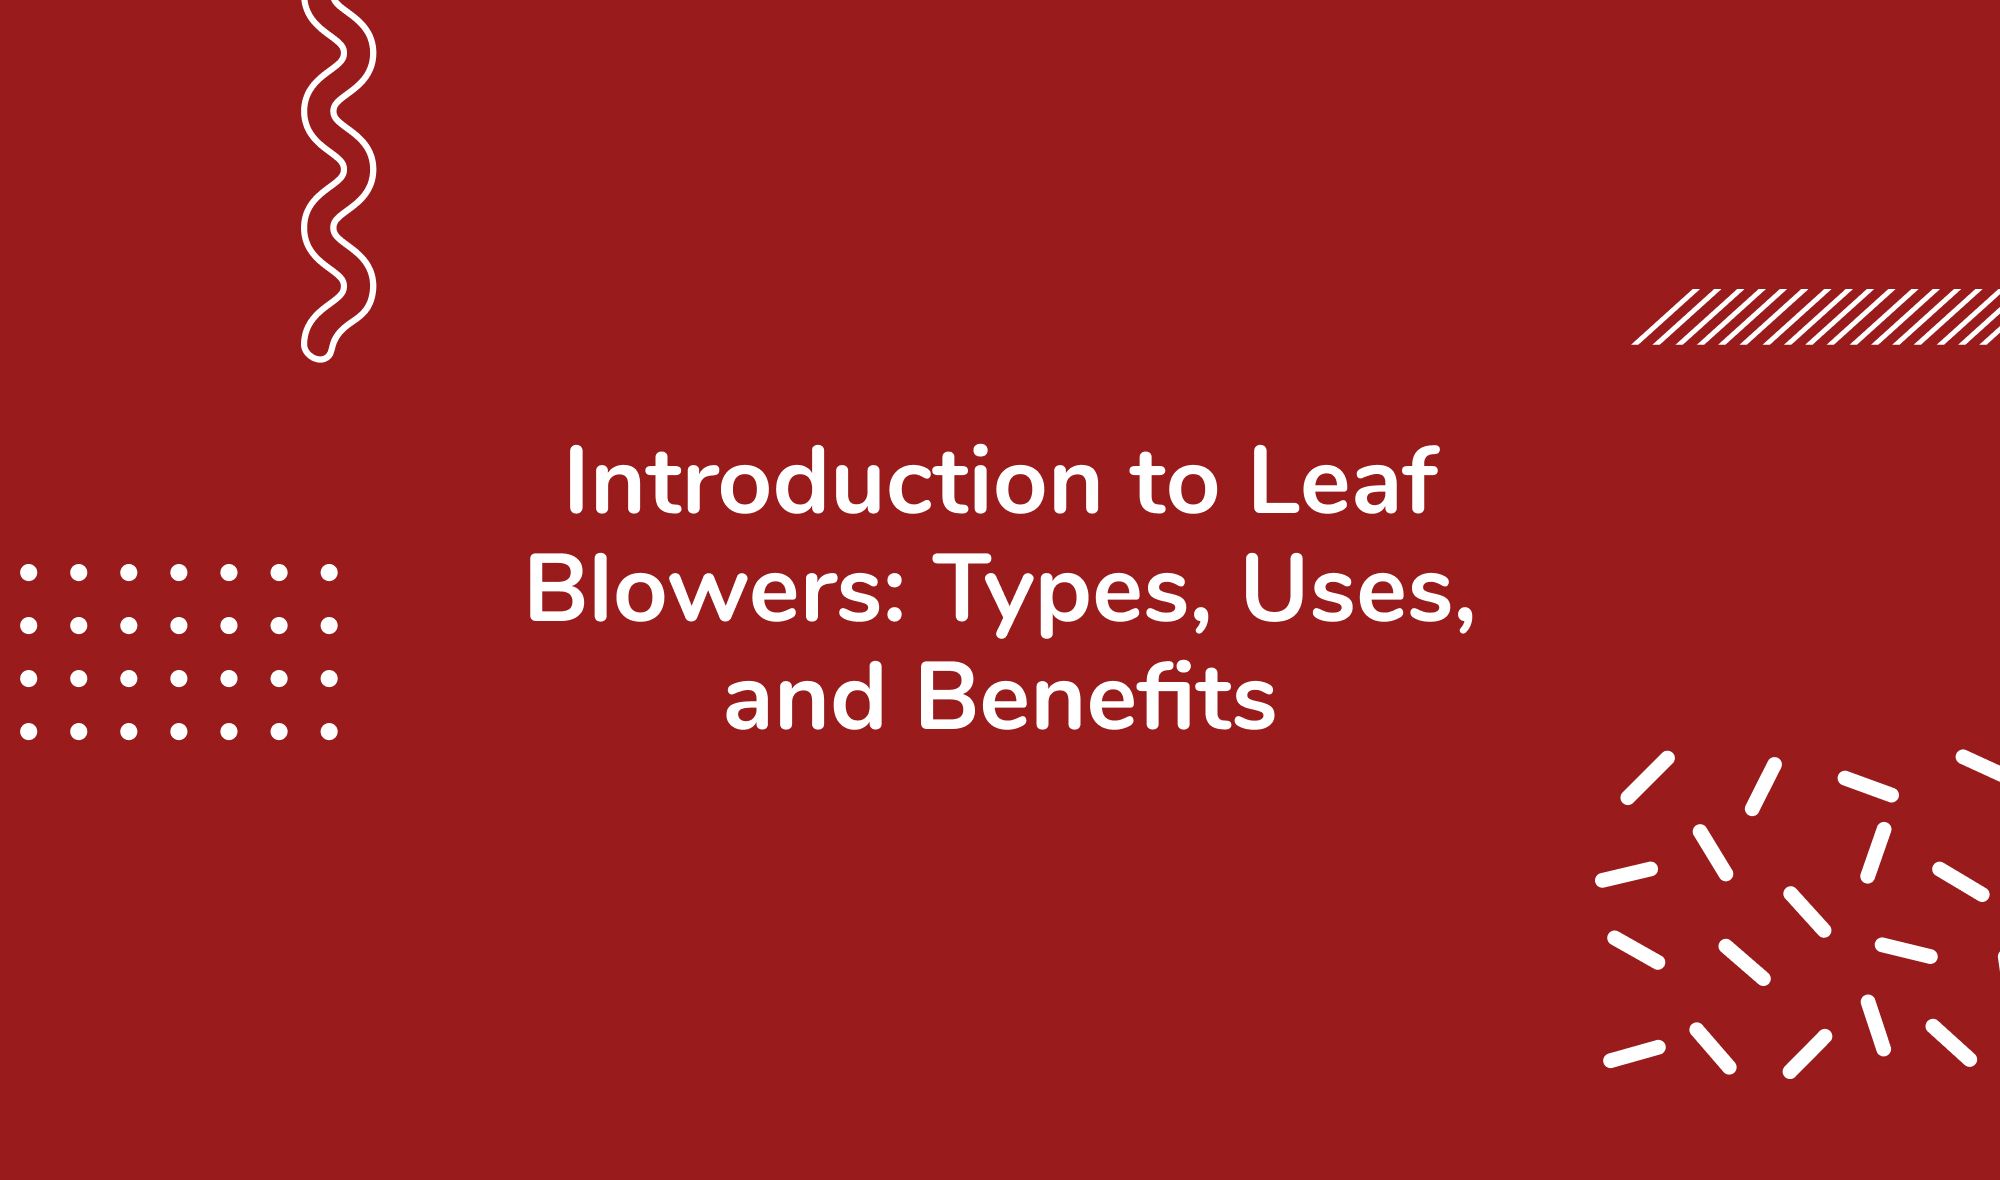 Introduction to Leaf Blowers: Types, Uses, and Benefits